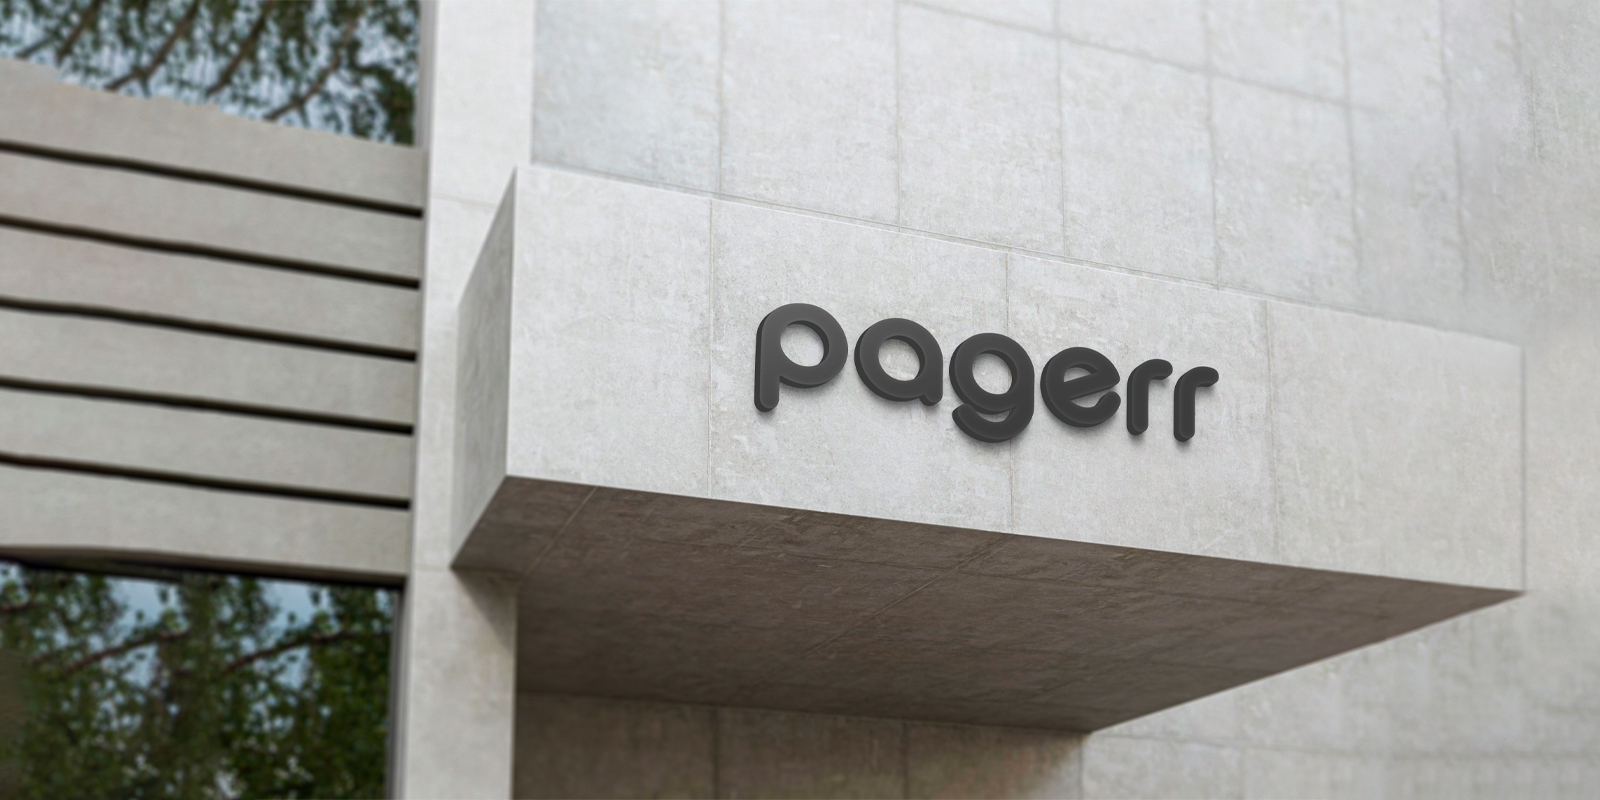 Logo signs in Cairns - Print with Pagerr